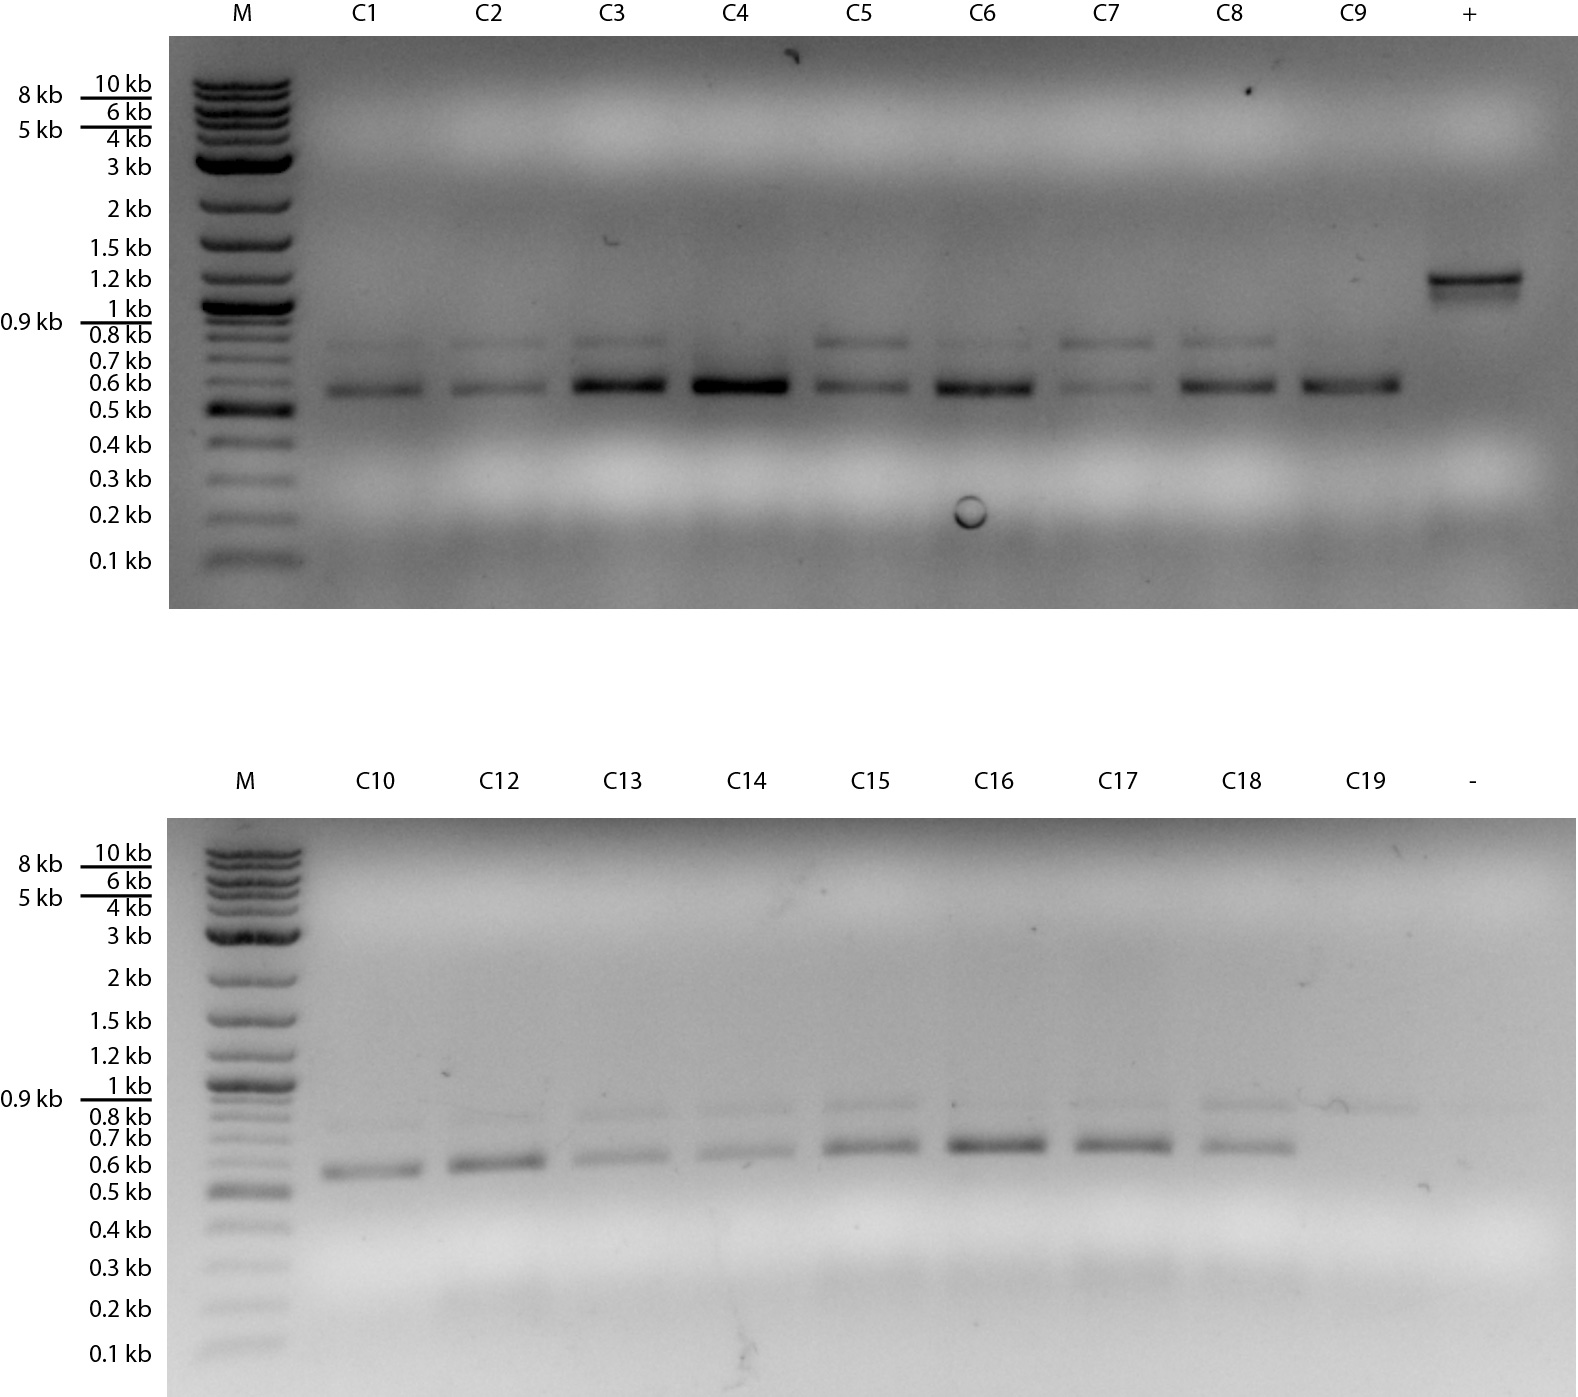 01102017 colony pcr 17 colonies potential GFP reporter transformants all negativecrobbedMarked.jpg